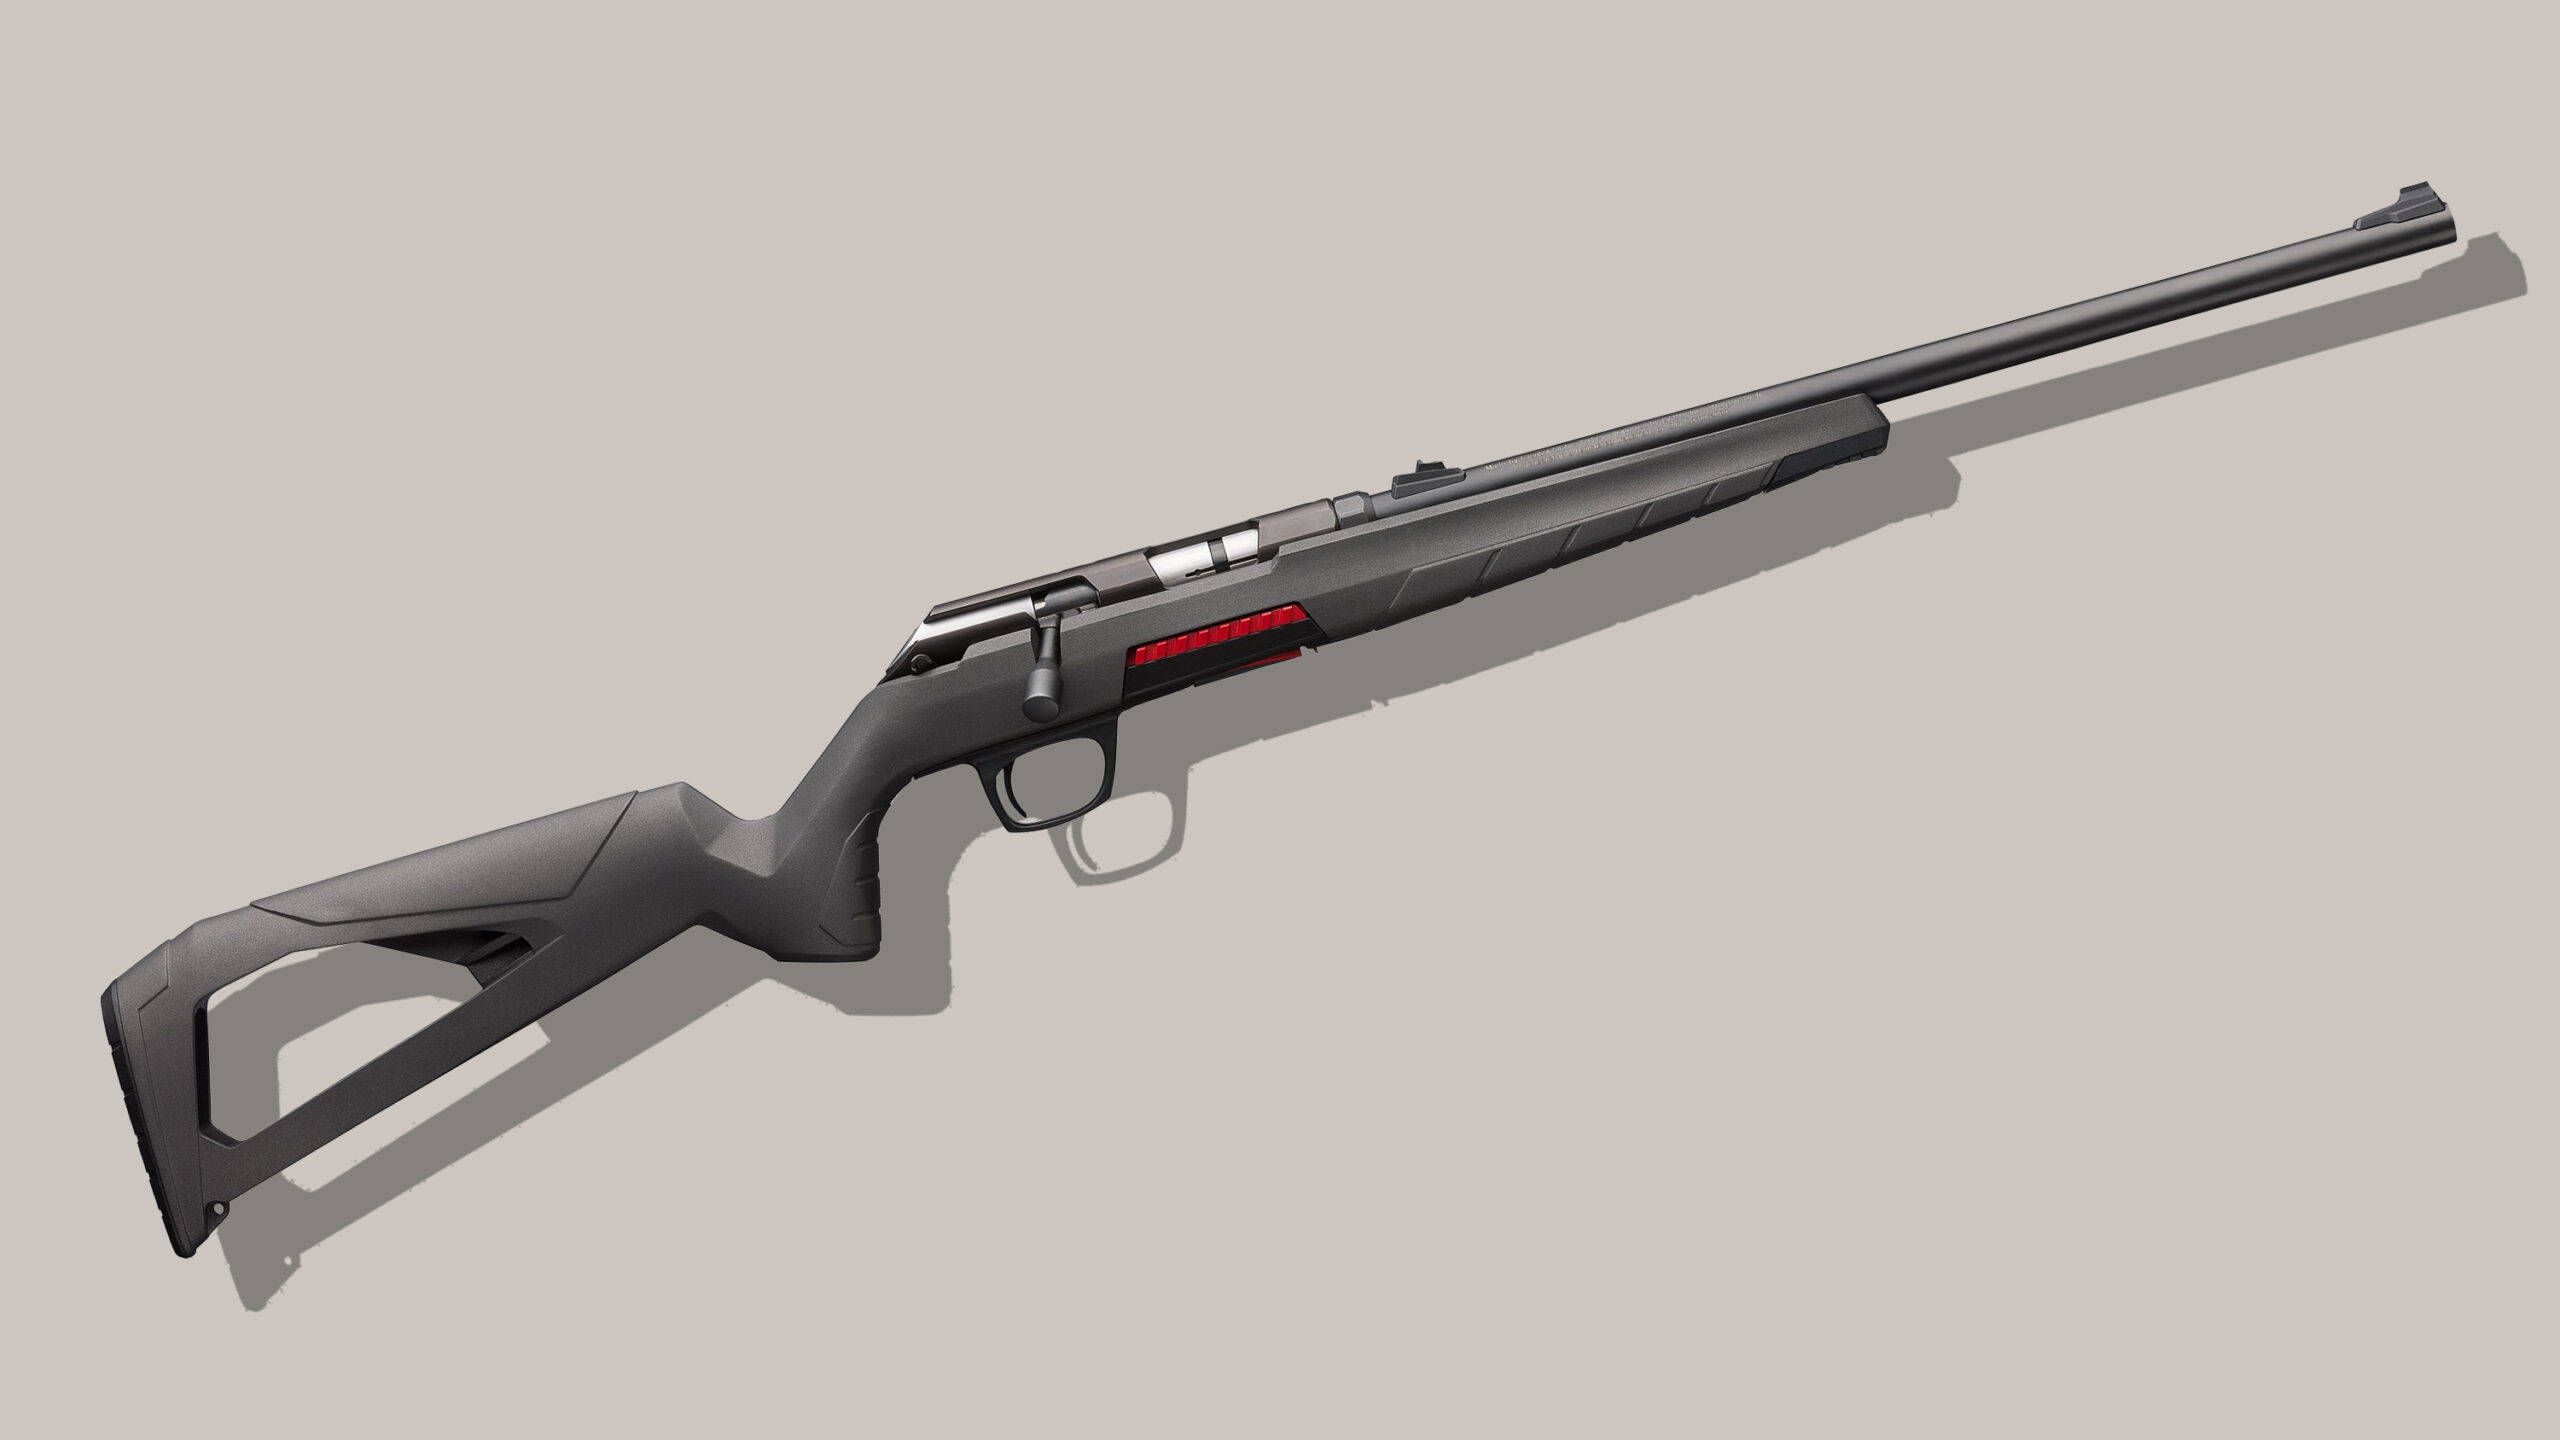 The Winchester Xpert bolt-action 22 rifle.